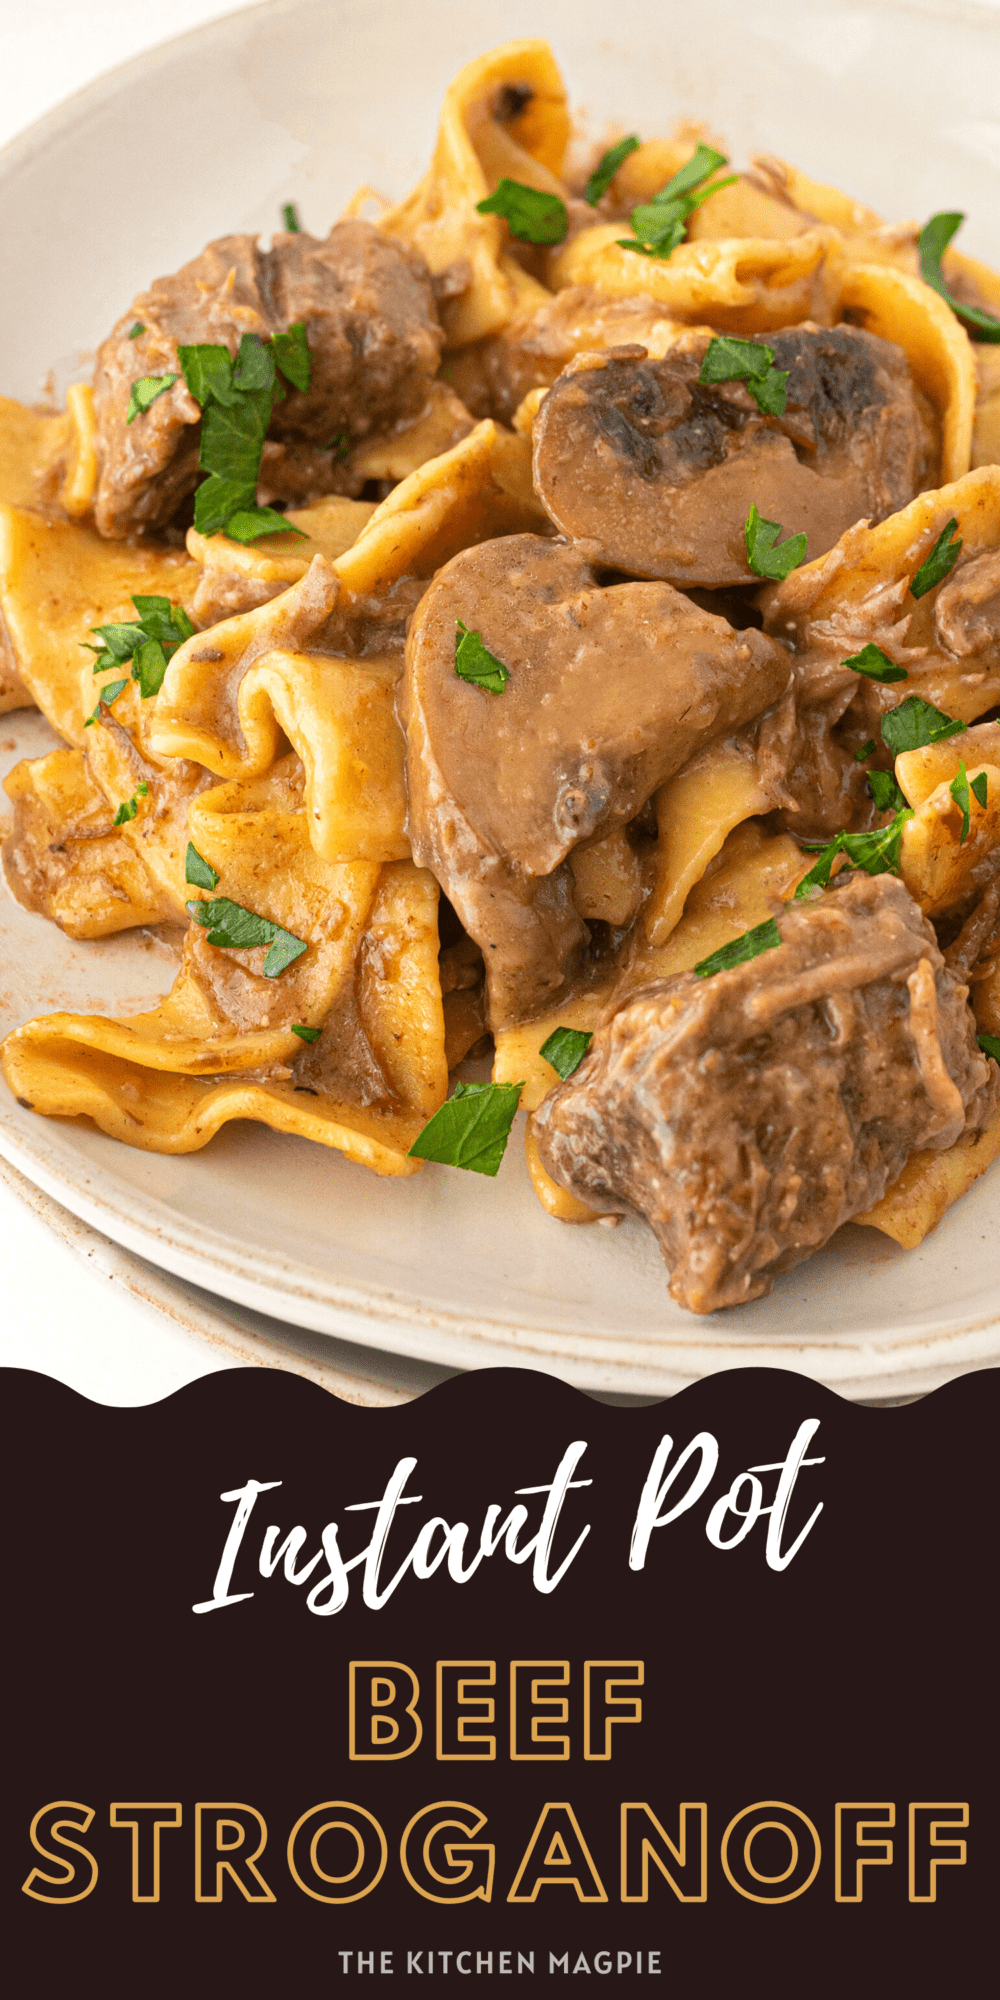 How to make delicious beef stroganoff in your Instant Pot or pressure cooker!